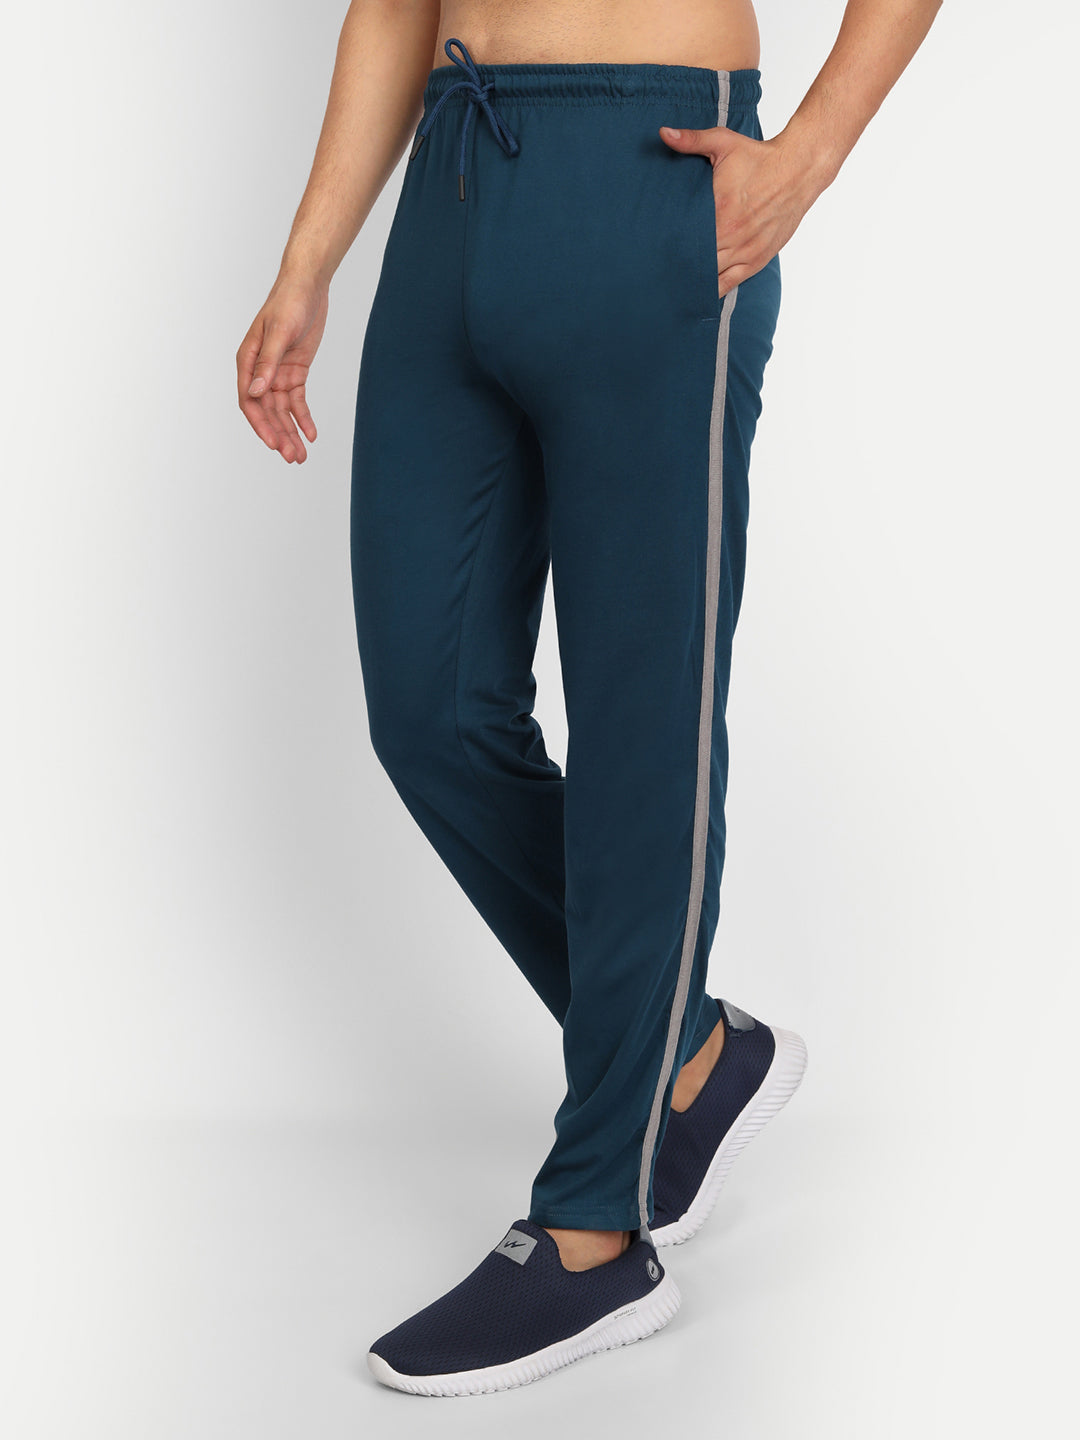 Green Track Pants: Buy Green Track Pants for Men Online at Best Price |  Jockey India